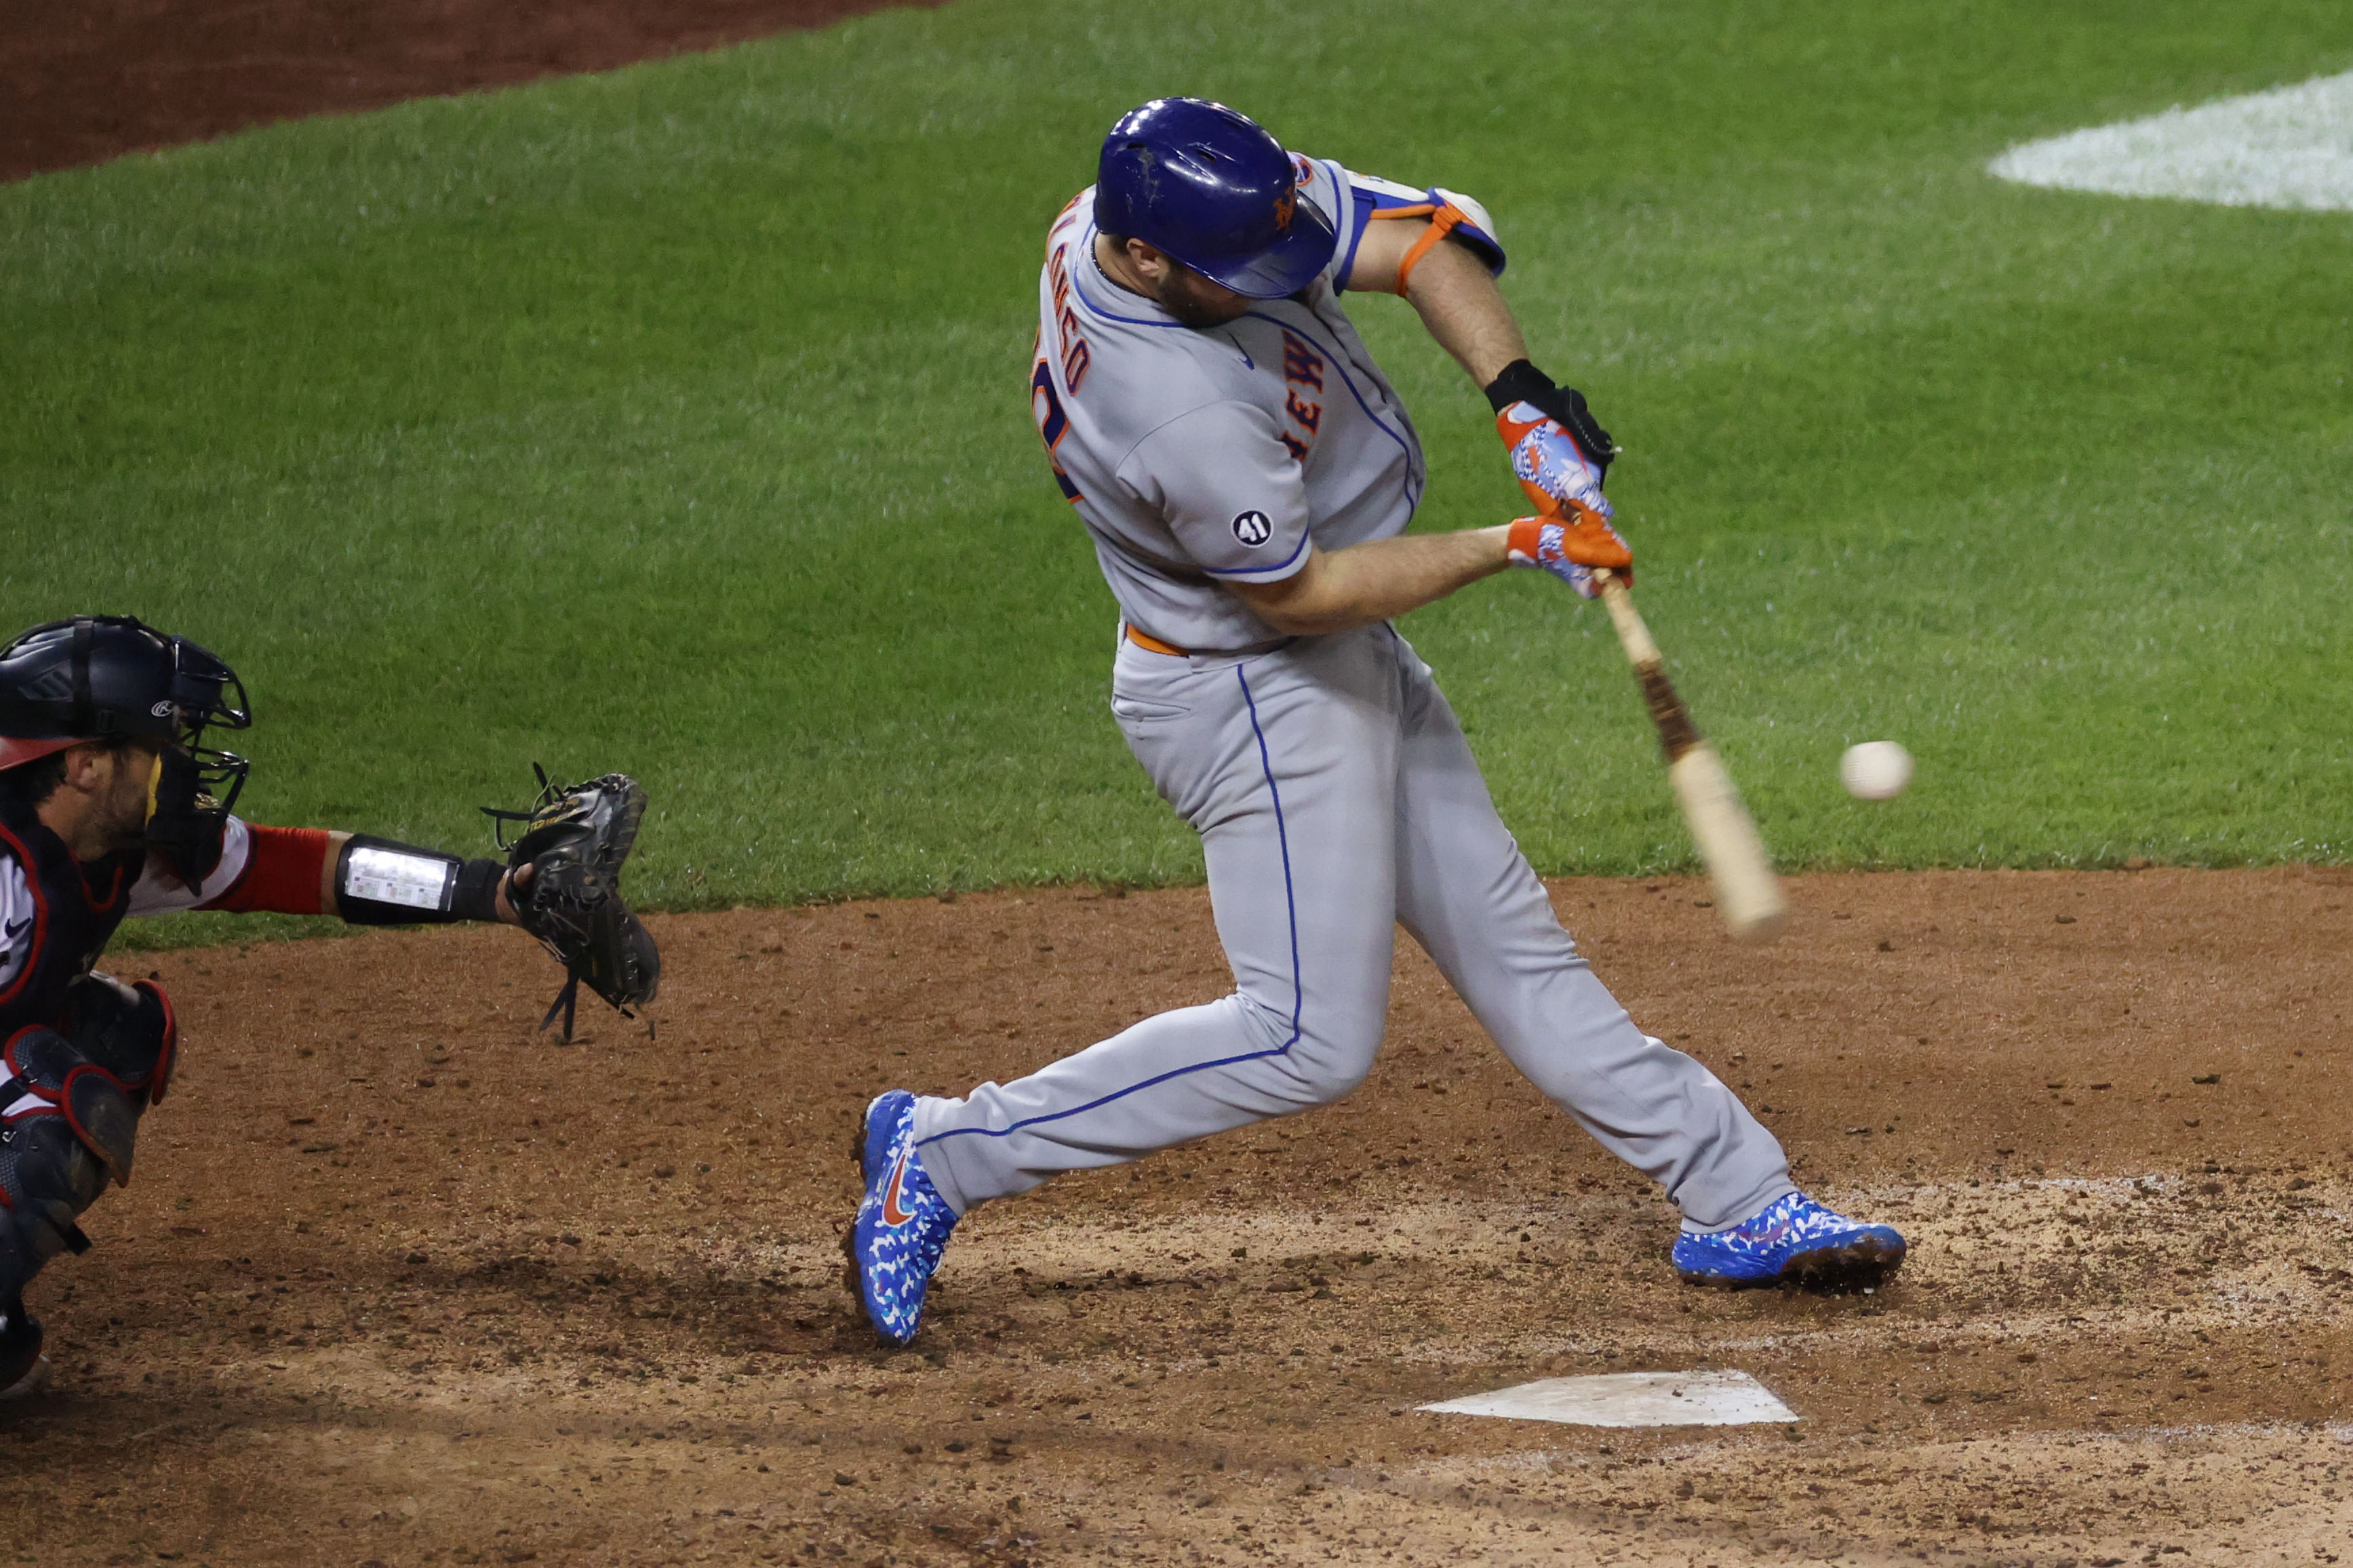 9/26/20 Game Preview: New York Mets at Washington Nationals, Doubleheader Edition